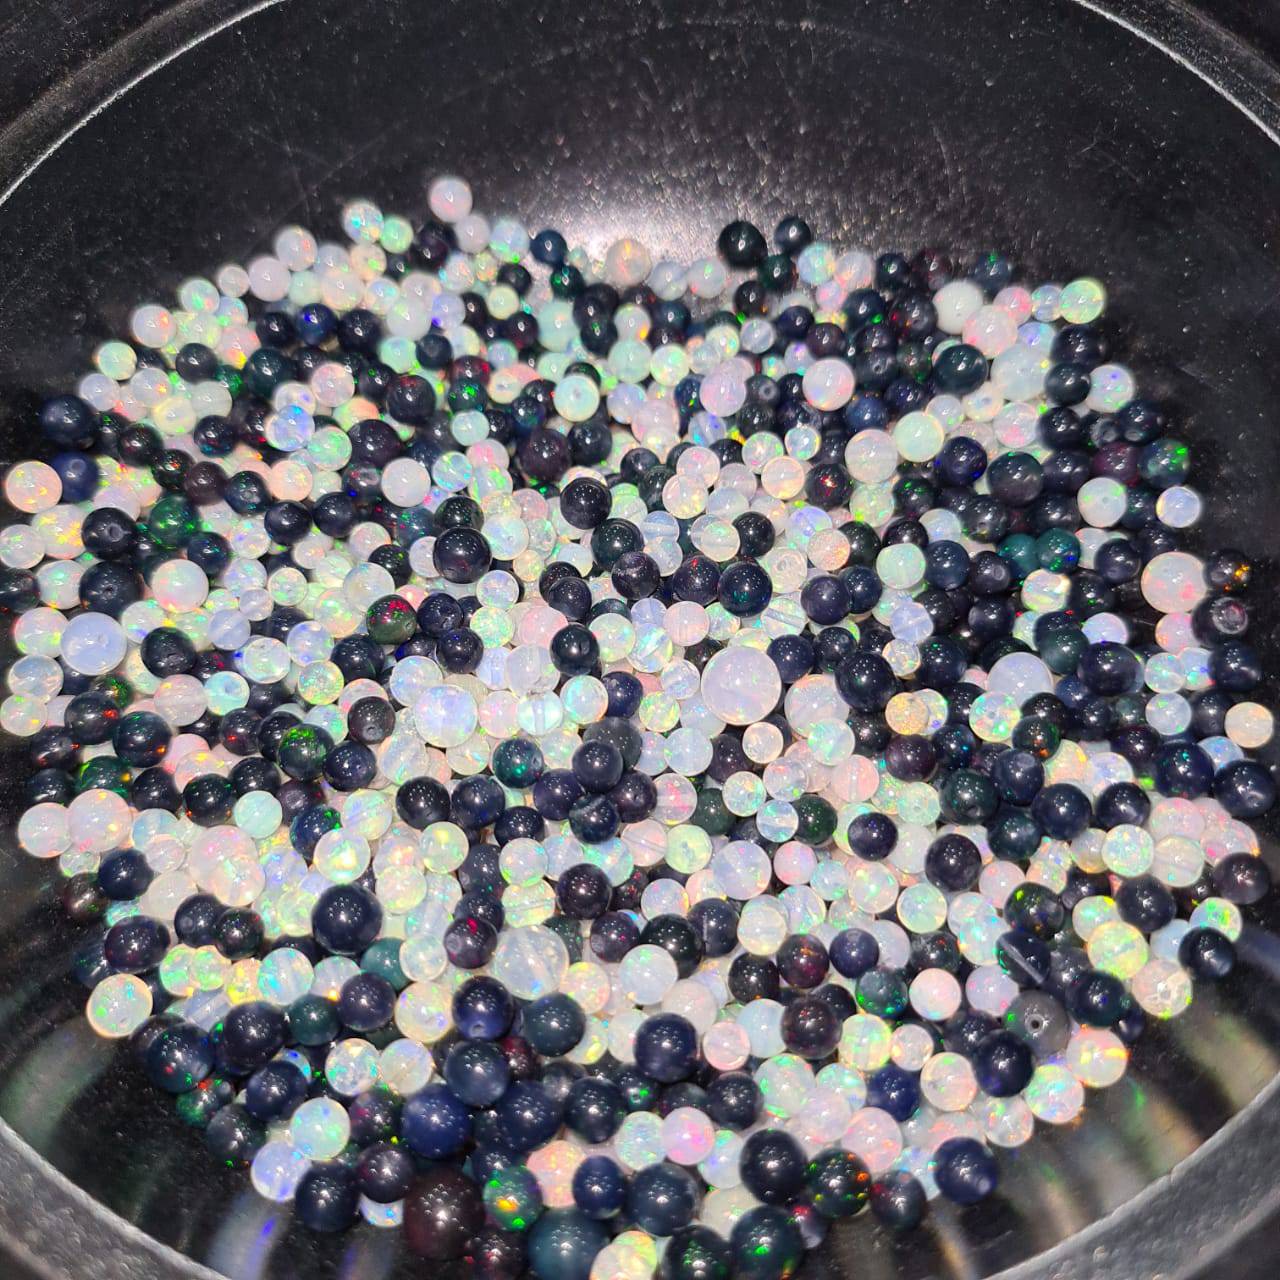 10 Cts Opal Sphere Beads Mix Of Clear and Black Opals - The LabradoriteKing